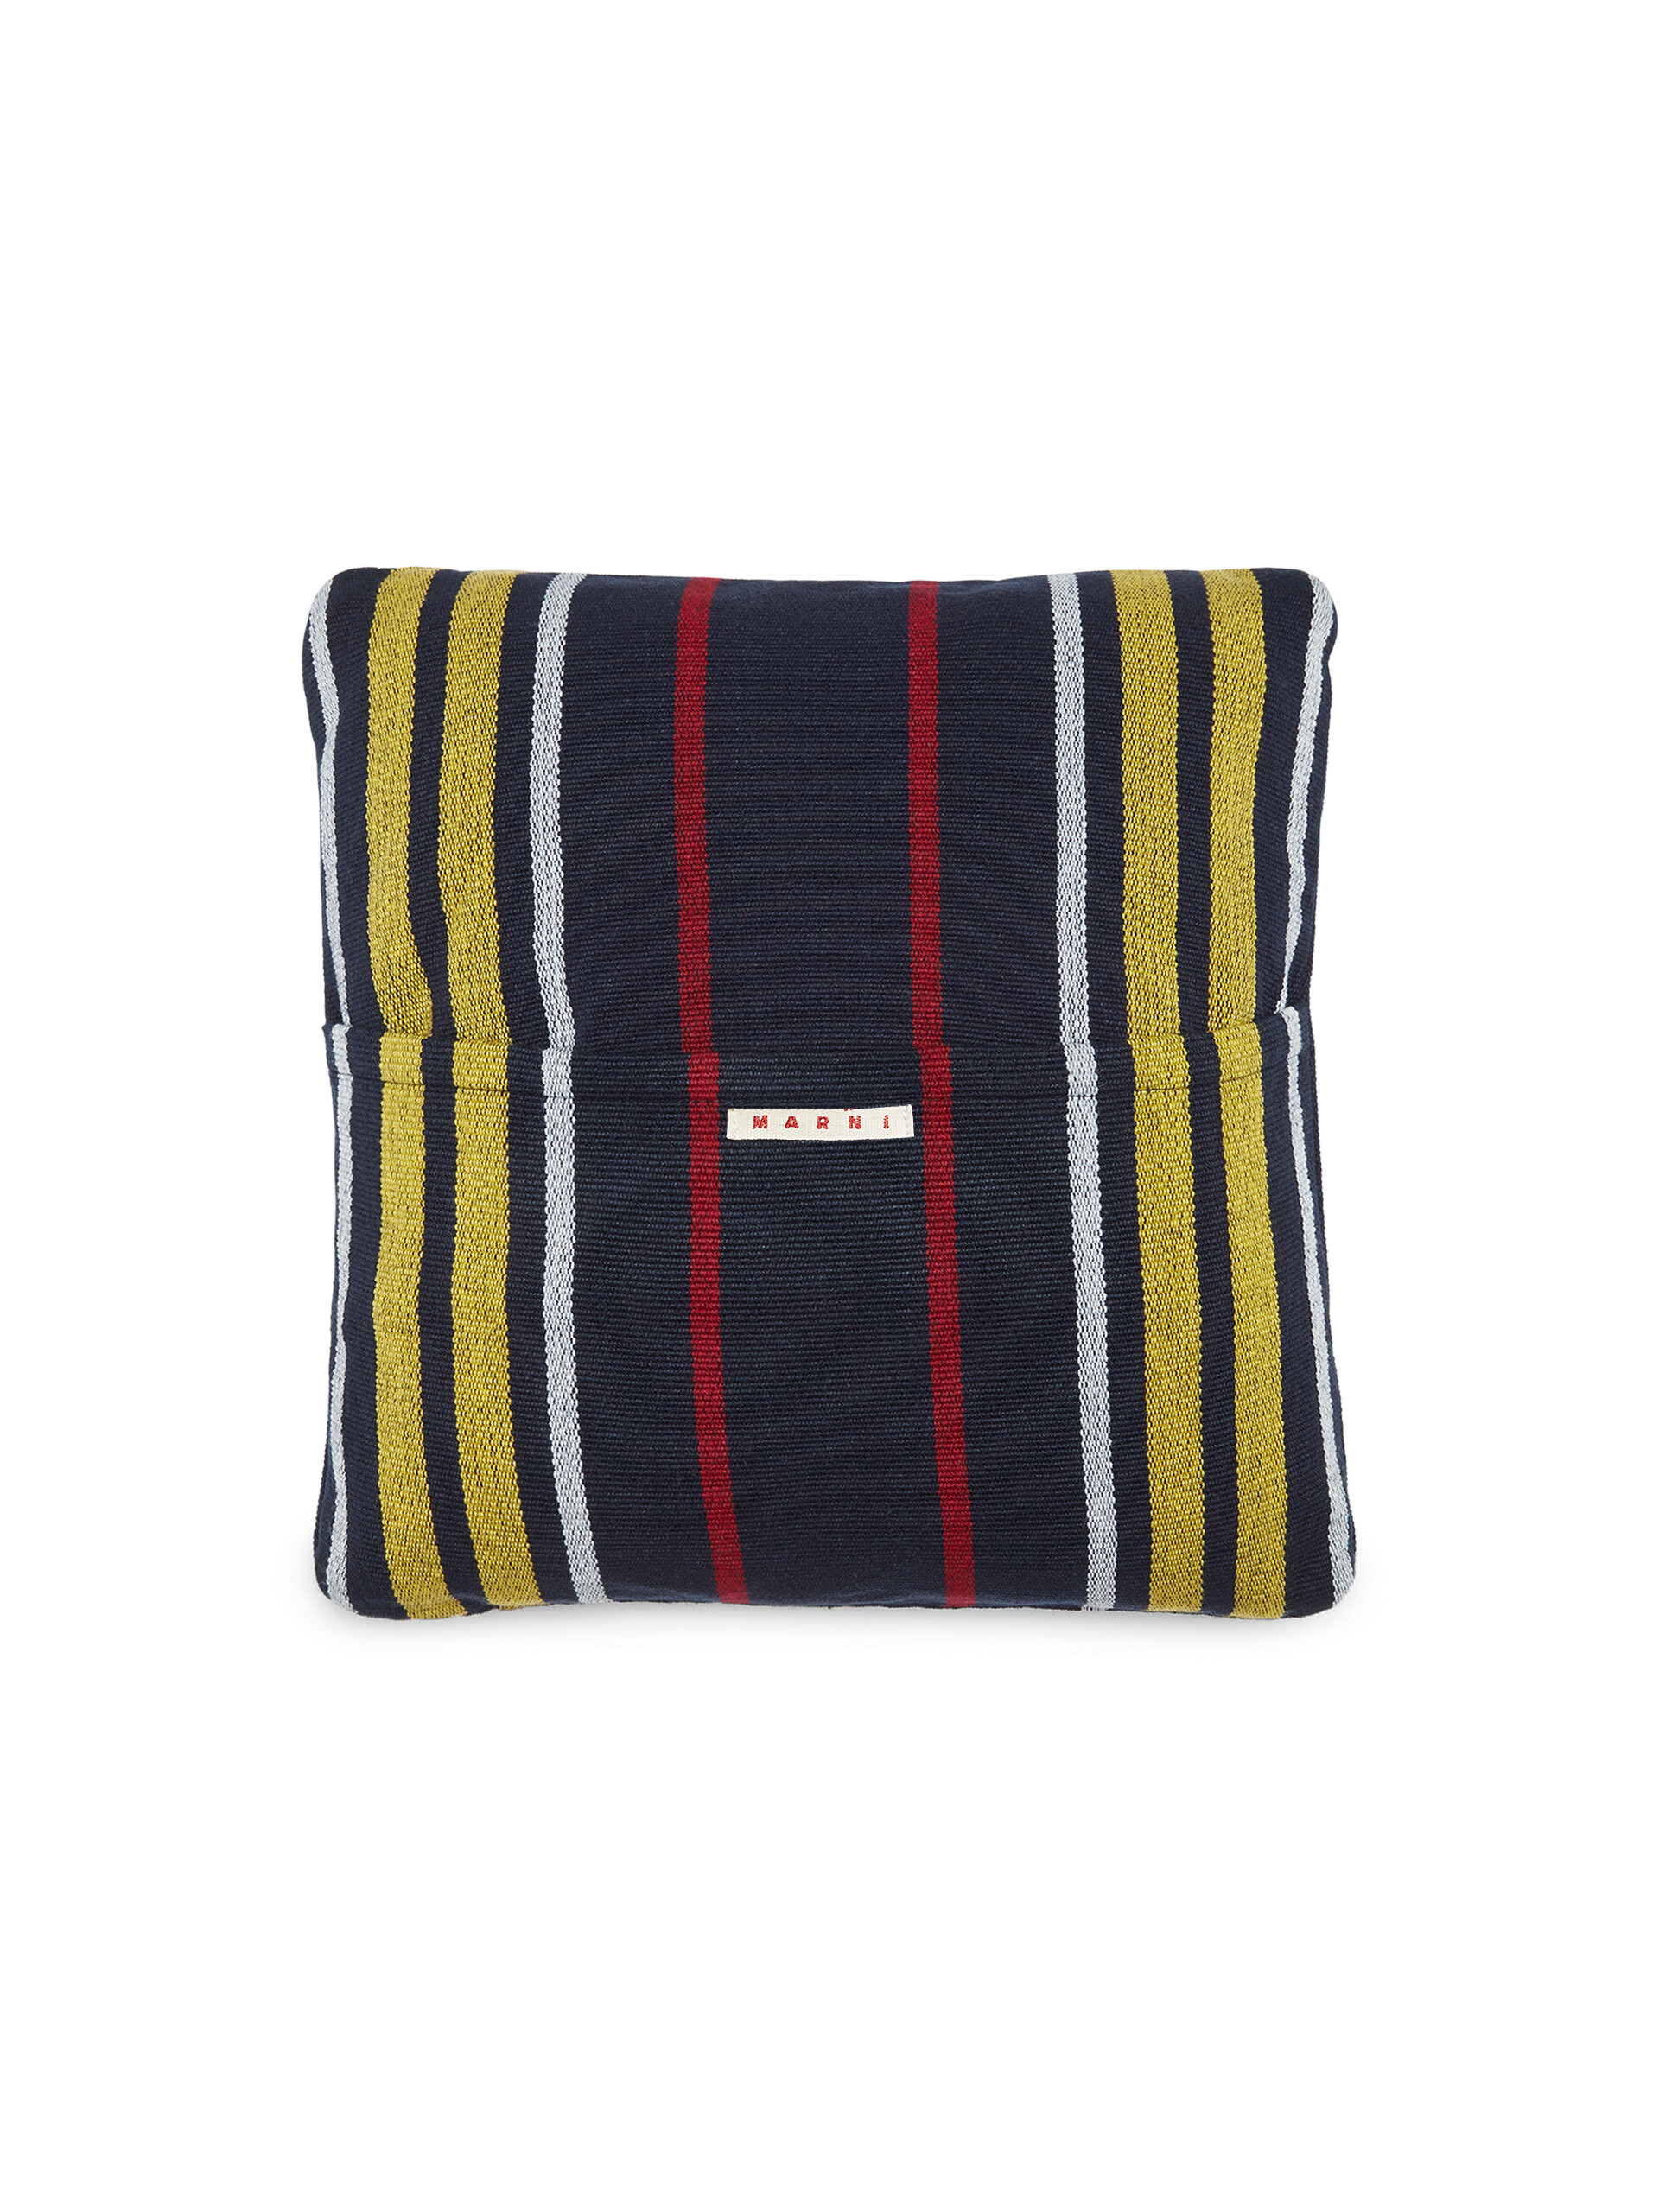 MARNI MARKET square pillow cover in polyester with black yellow and red vertical stripes - Furniture - Image 2